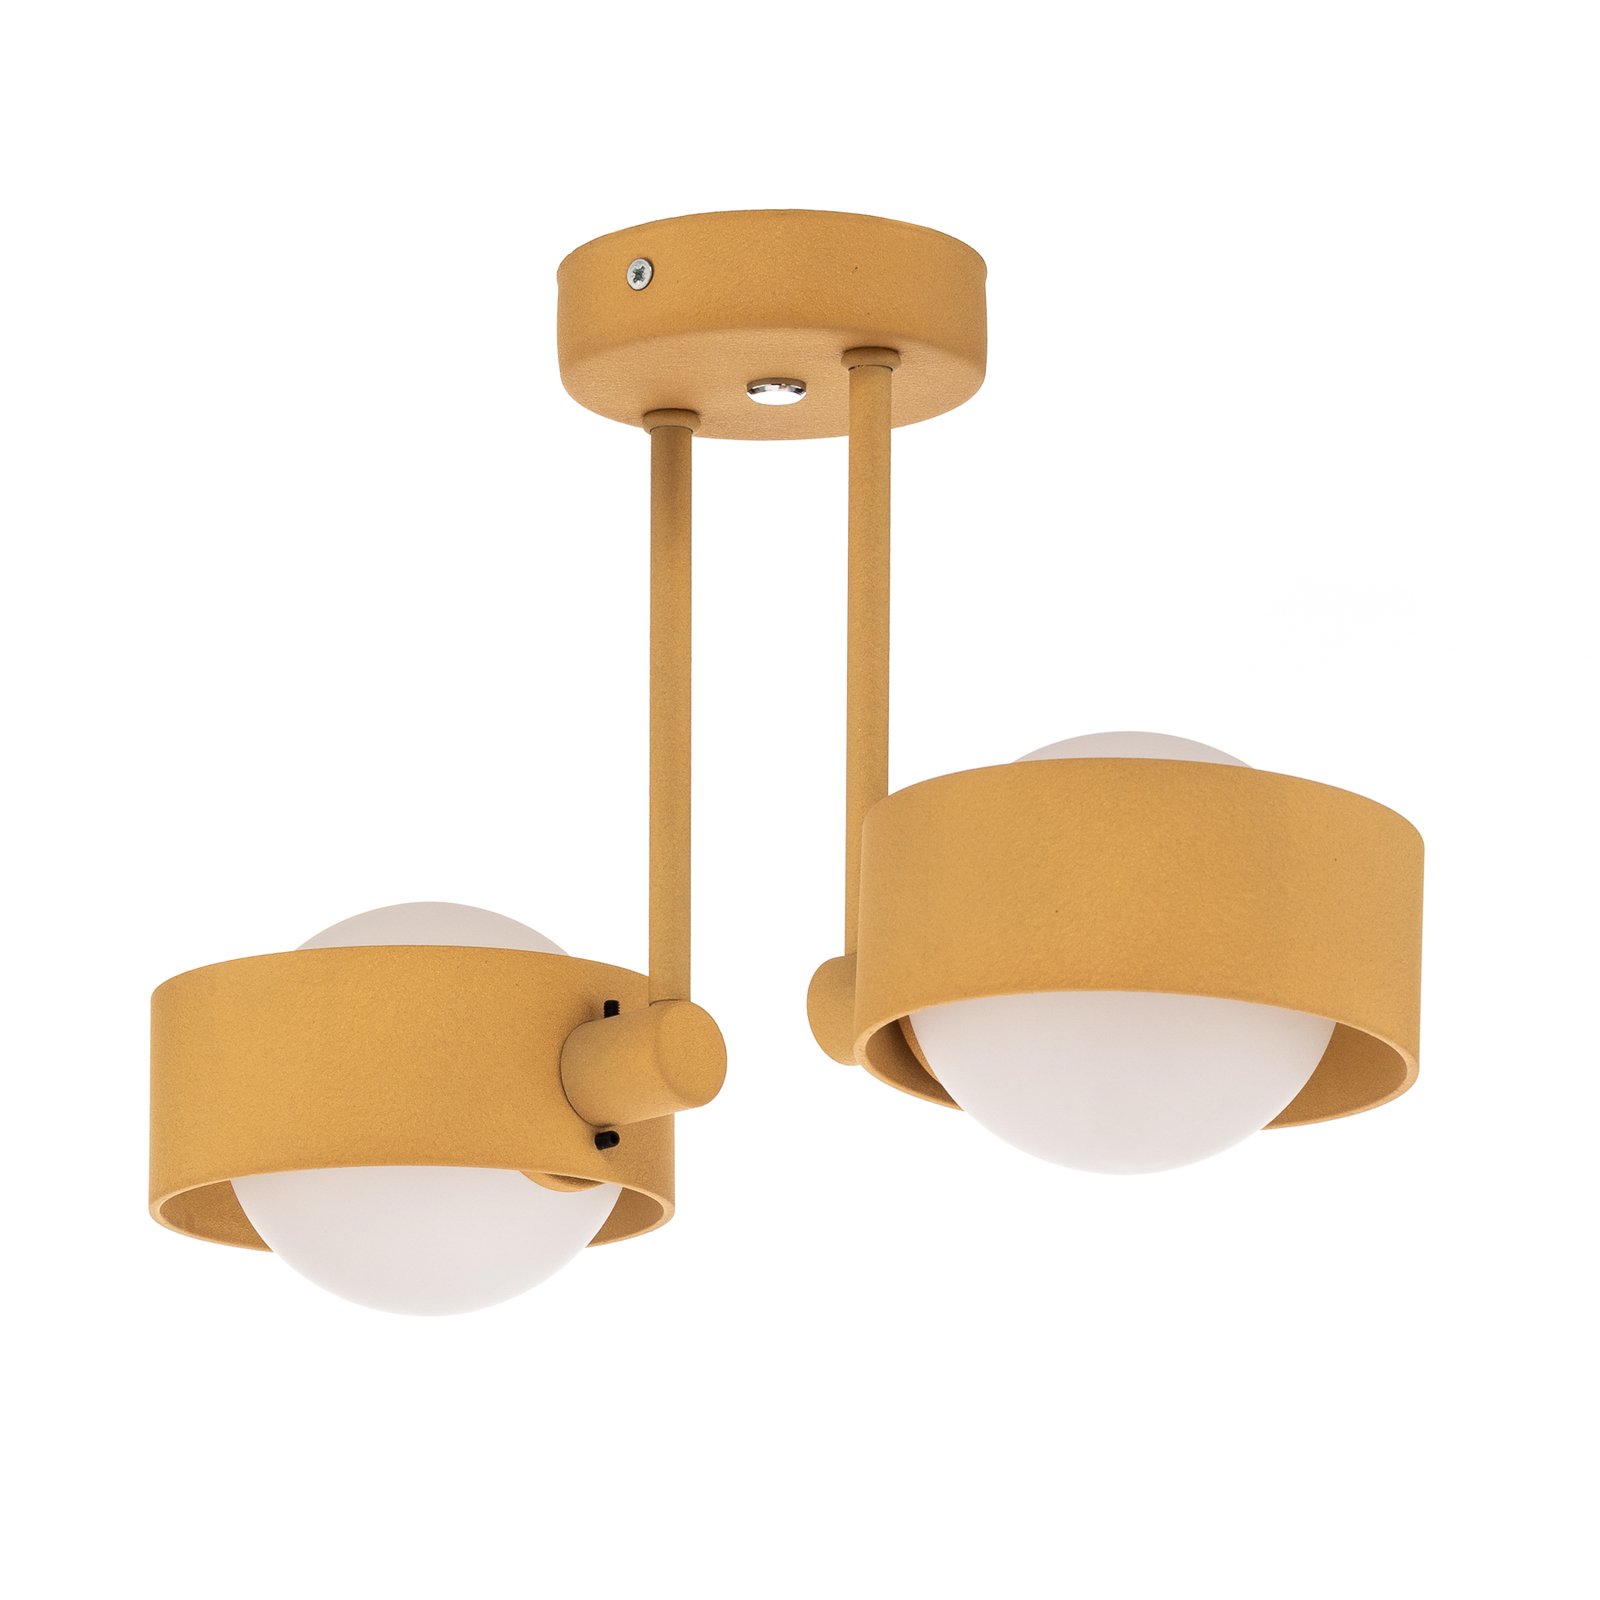 Mado ceiling light, steel, gold, two-bulb